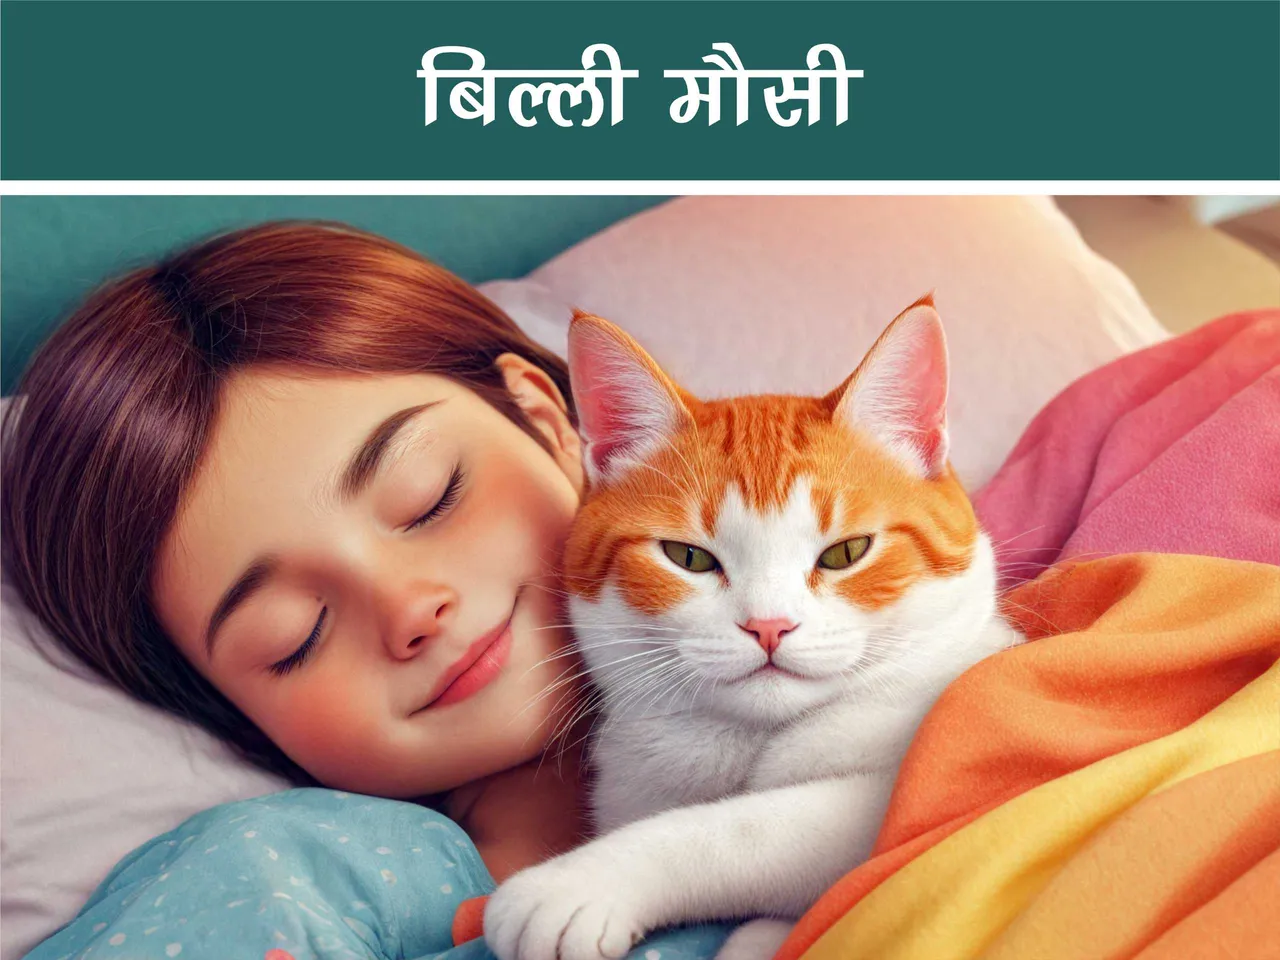 cartoon image of a cat sleeping next to a kid on bed